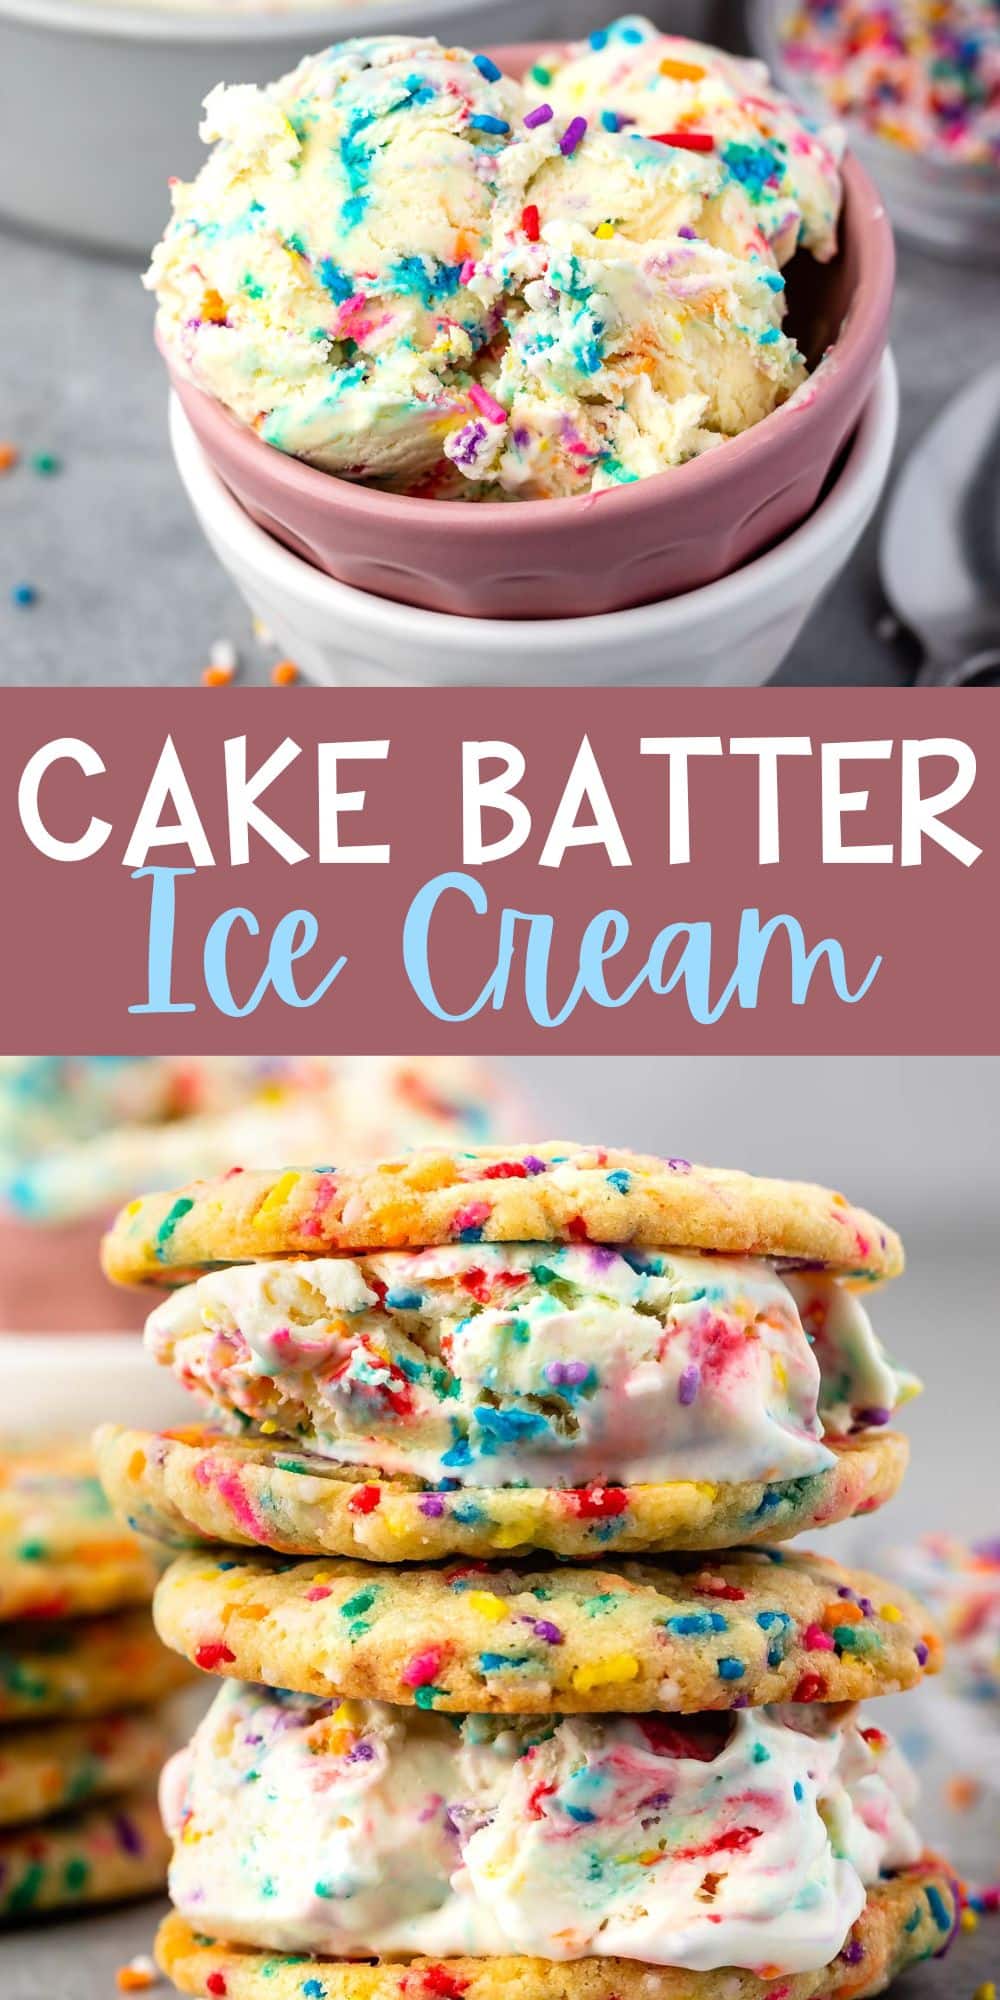 two photos of scooped ice cream with sprinkles mixed in, in pink and white stacked bowls with words on the image.